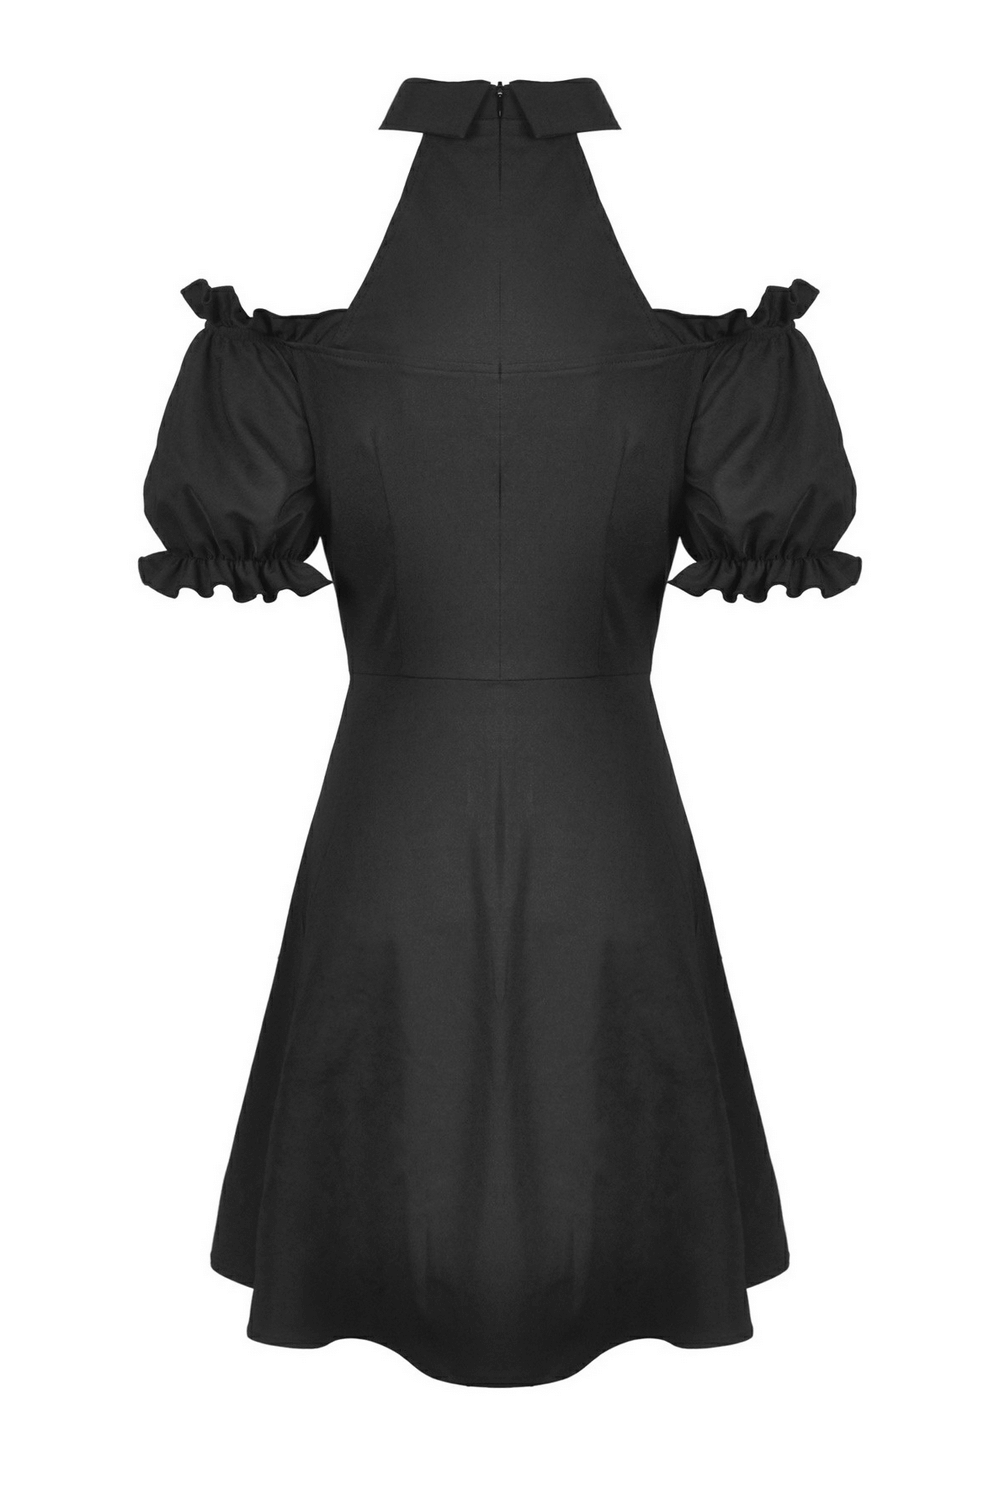 Women's Gothic Off-Shoulder Dress with Choker Collar